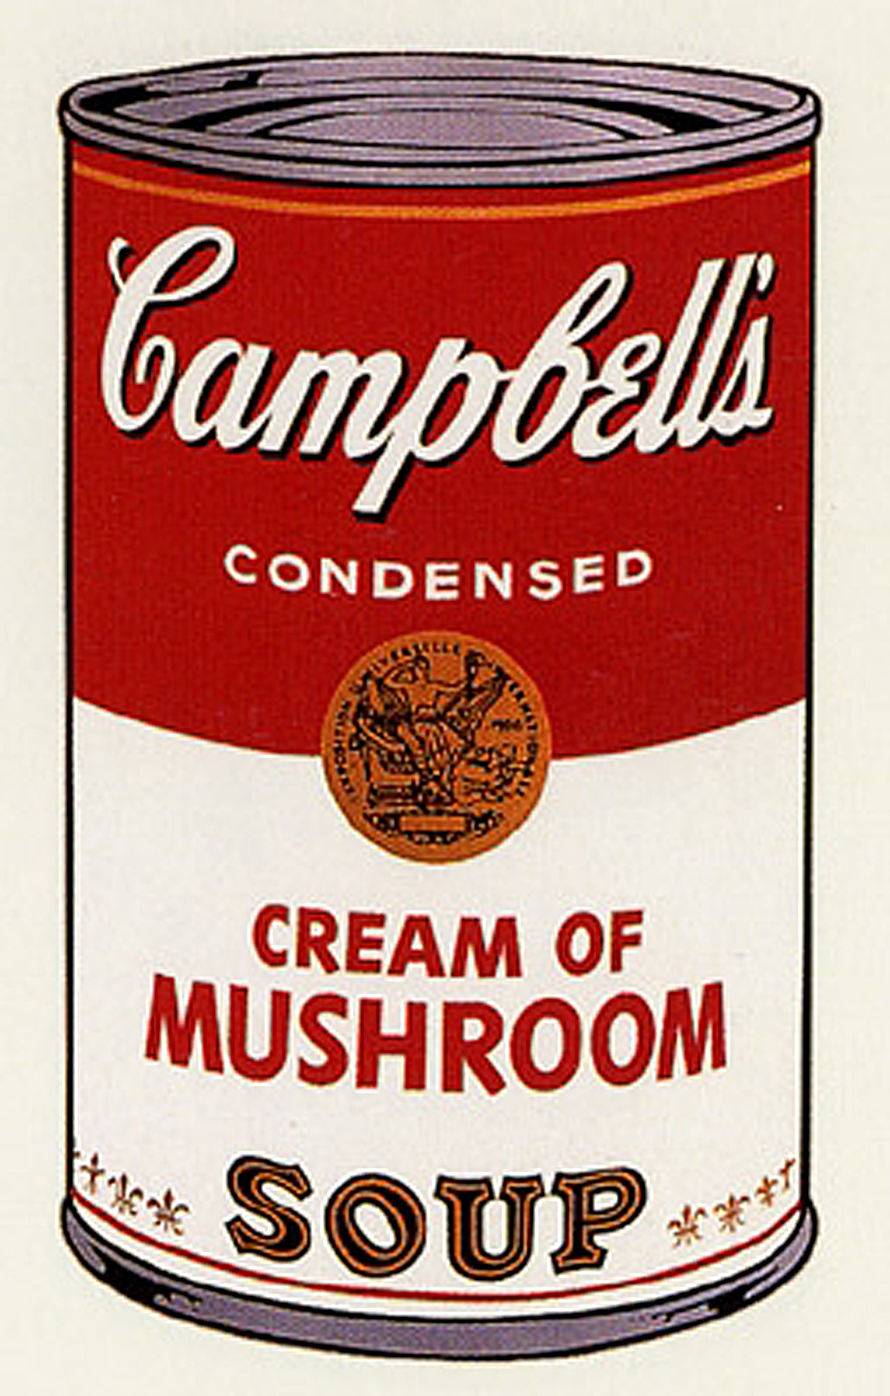 andy-warhol-campbell-s-soup-campbells-soup-i-cream-of-mushroom-1968